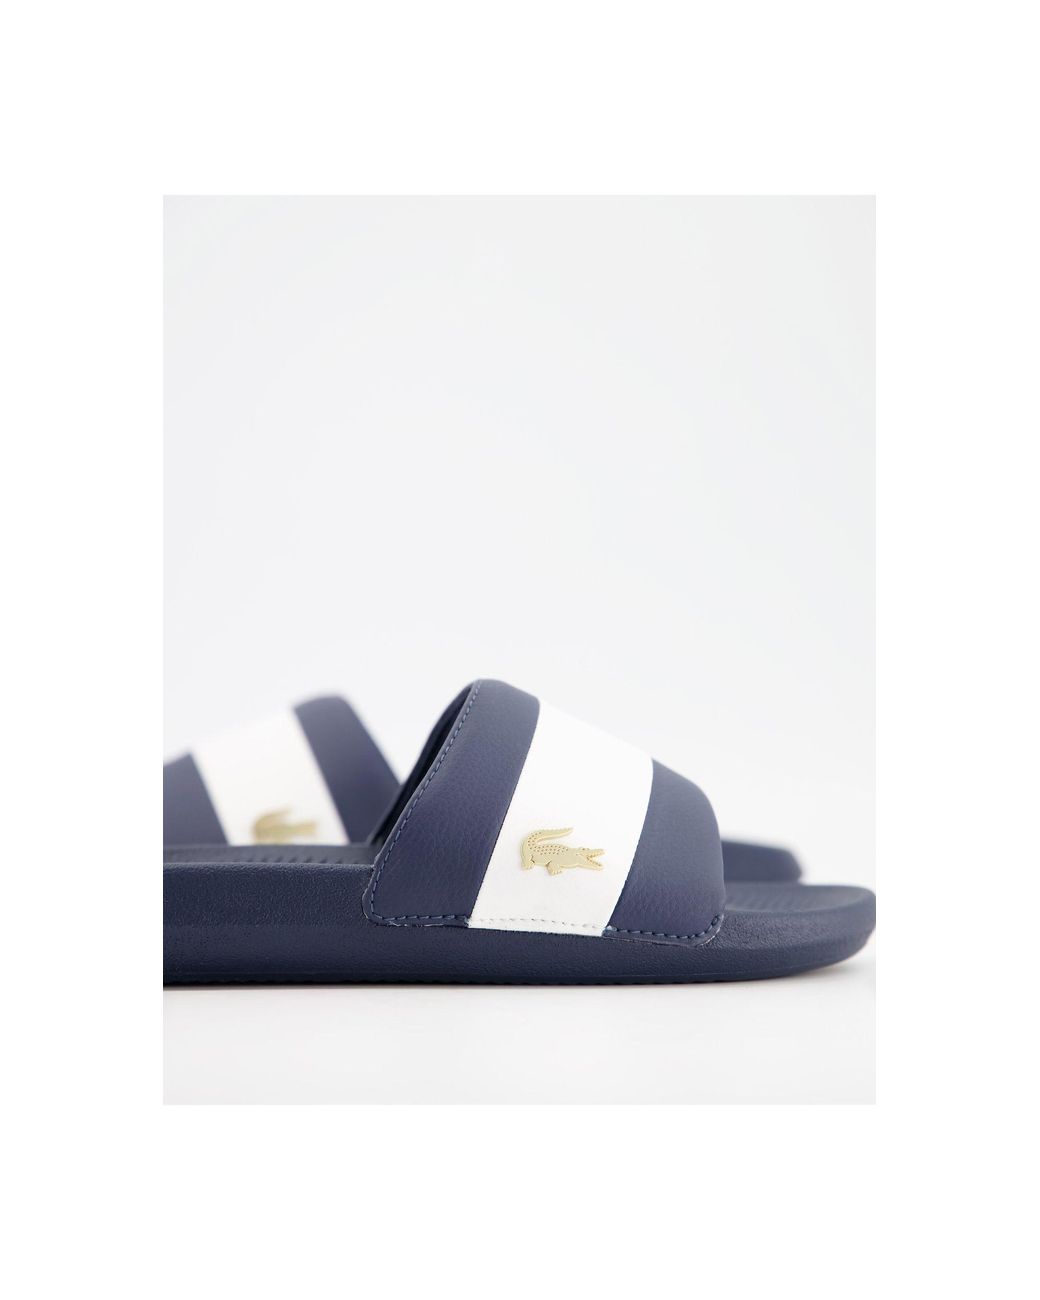 Lacoste Croco Sliders Navy With Gold 